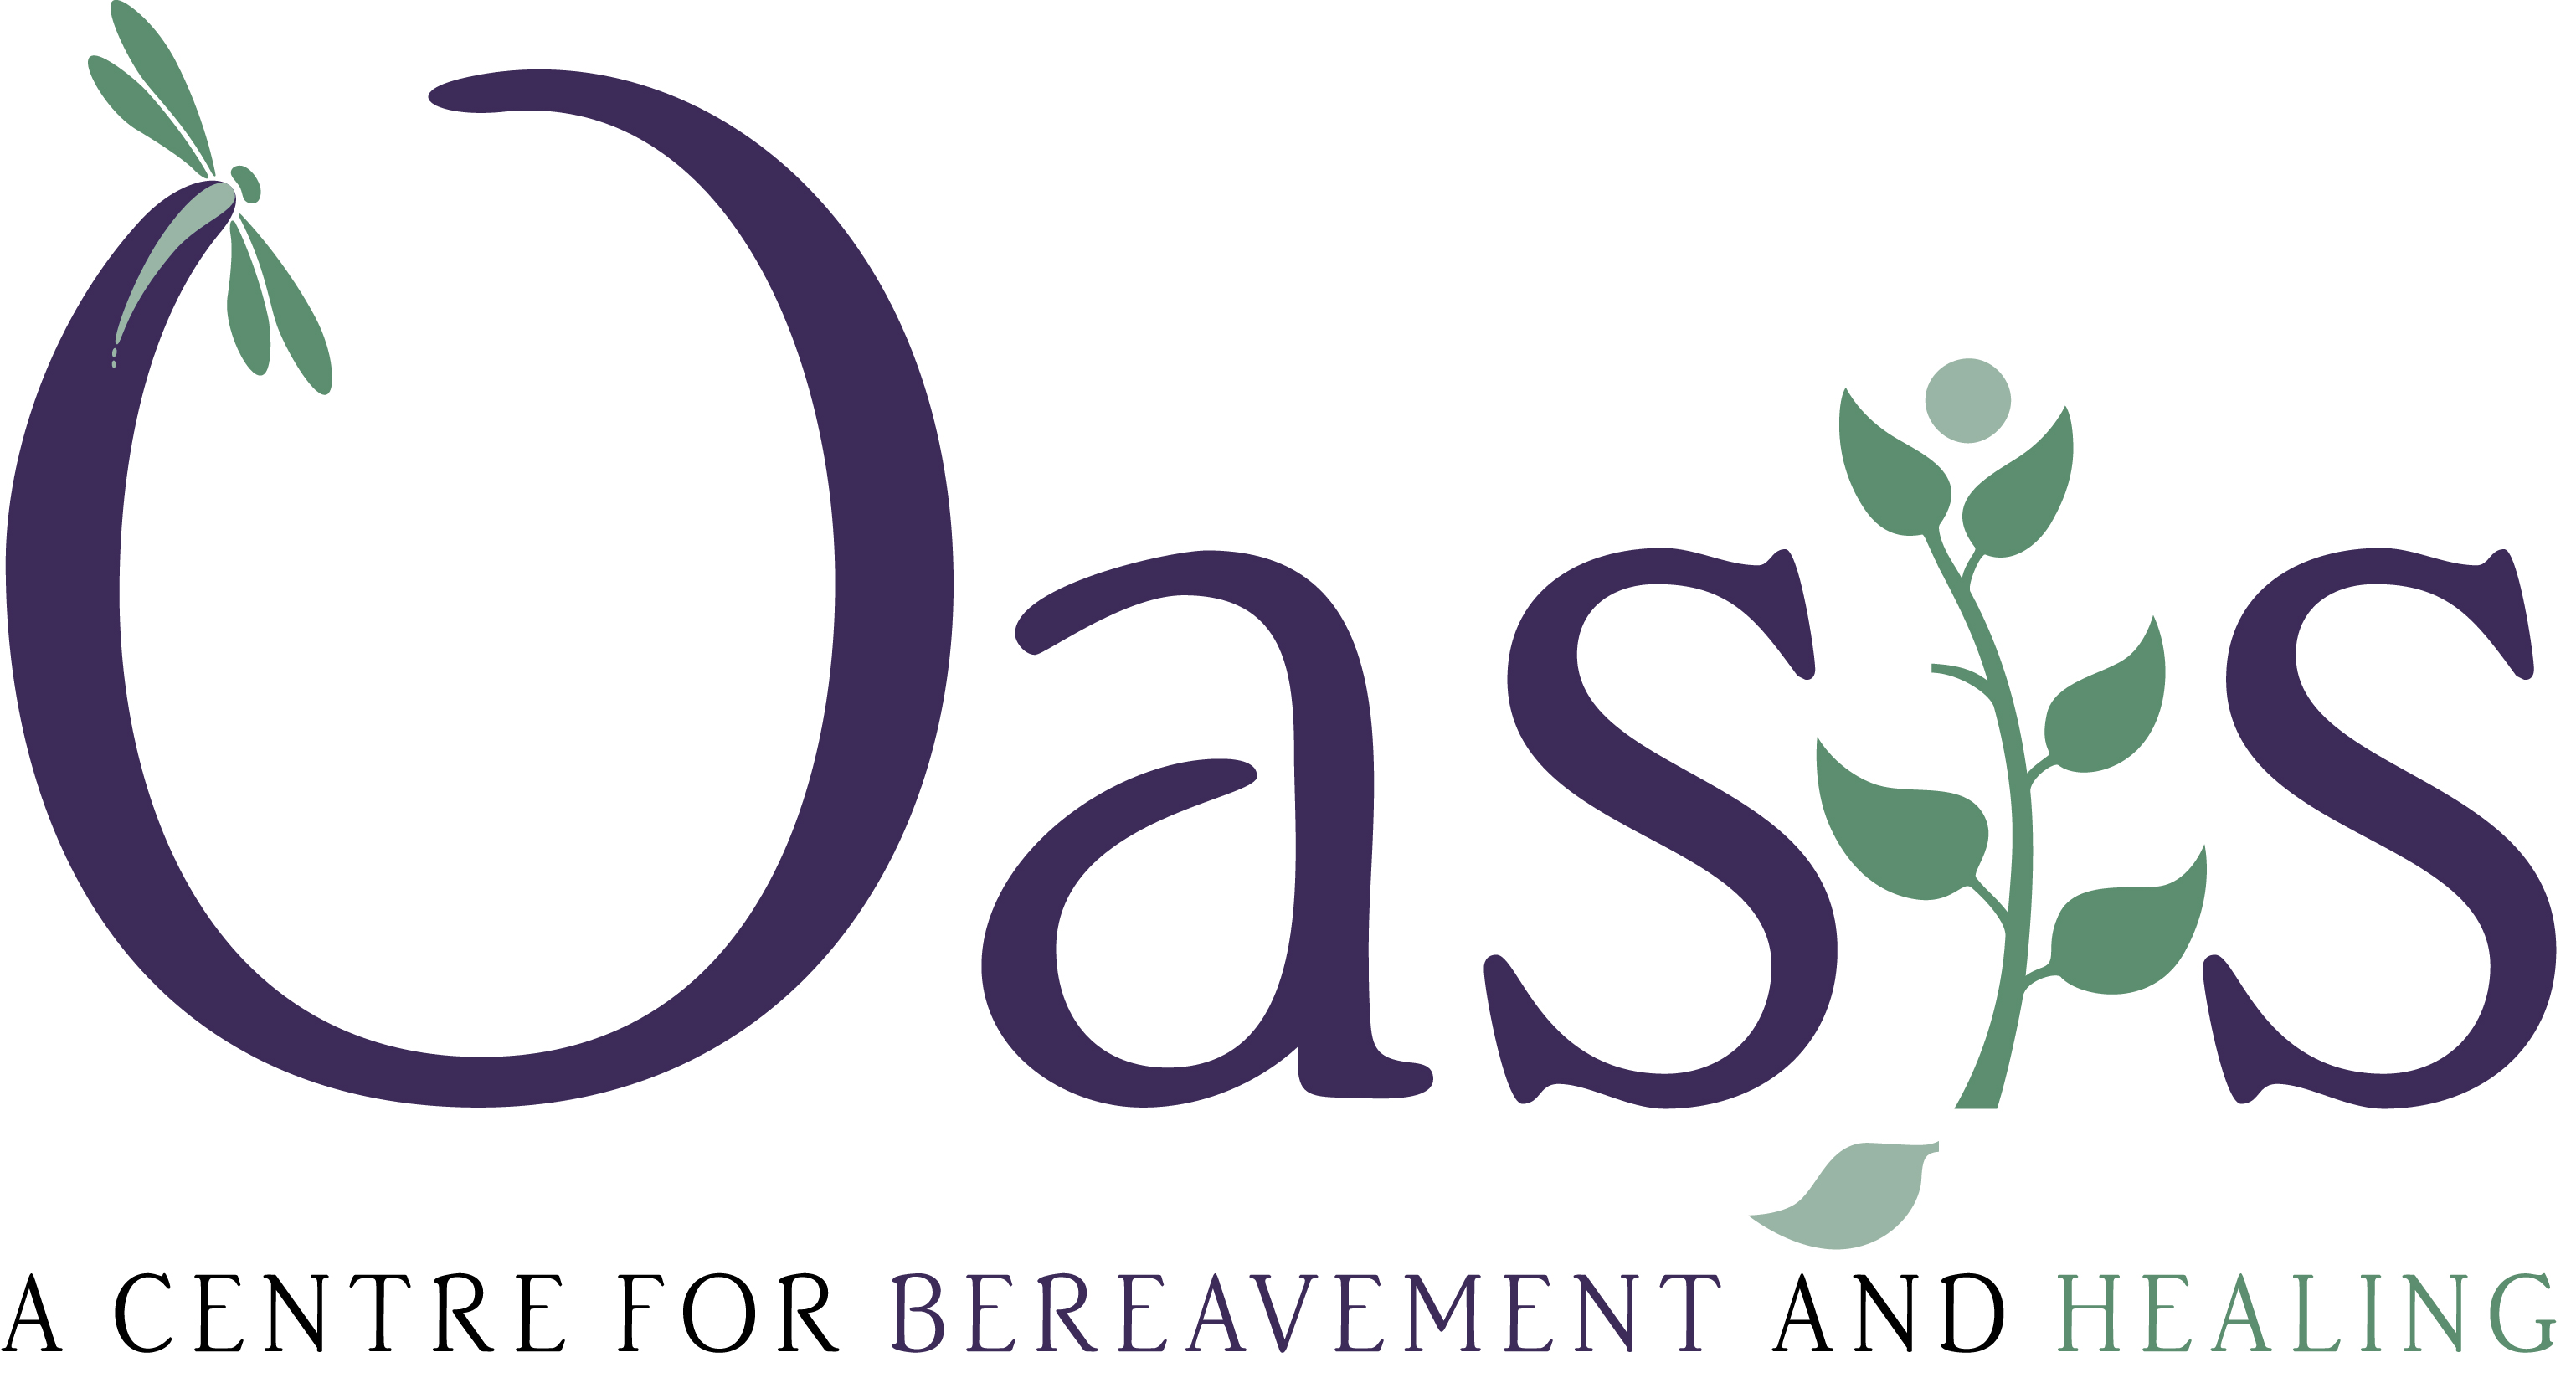 Oasis: A Centre for Bereavement and Healing